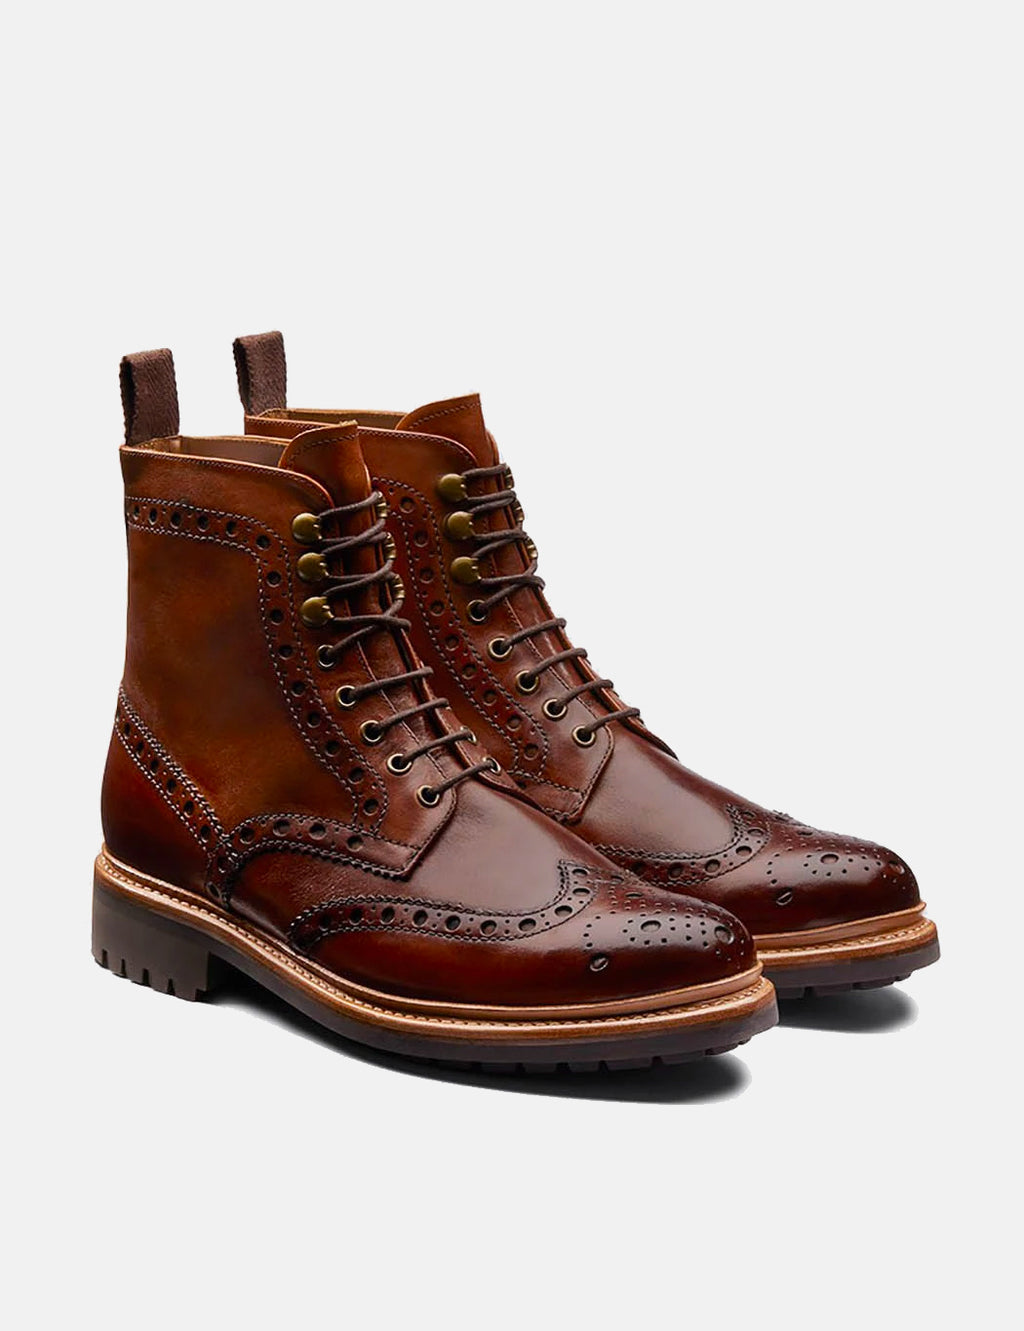 grenson fred boots sale